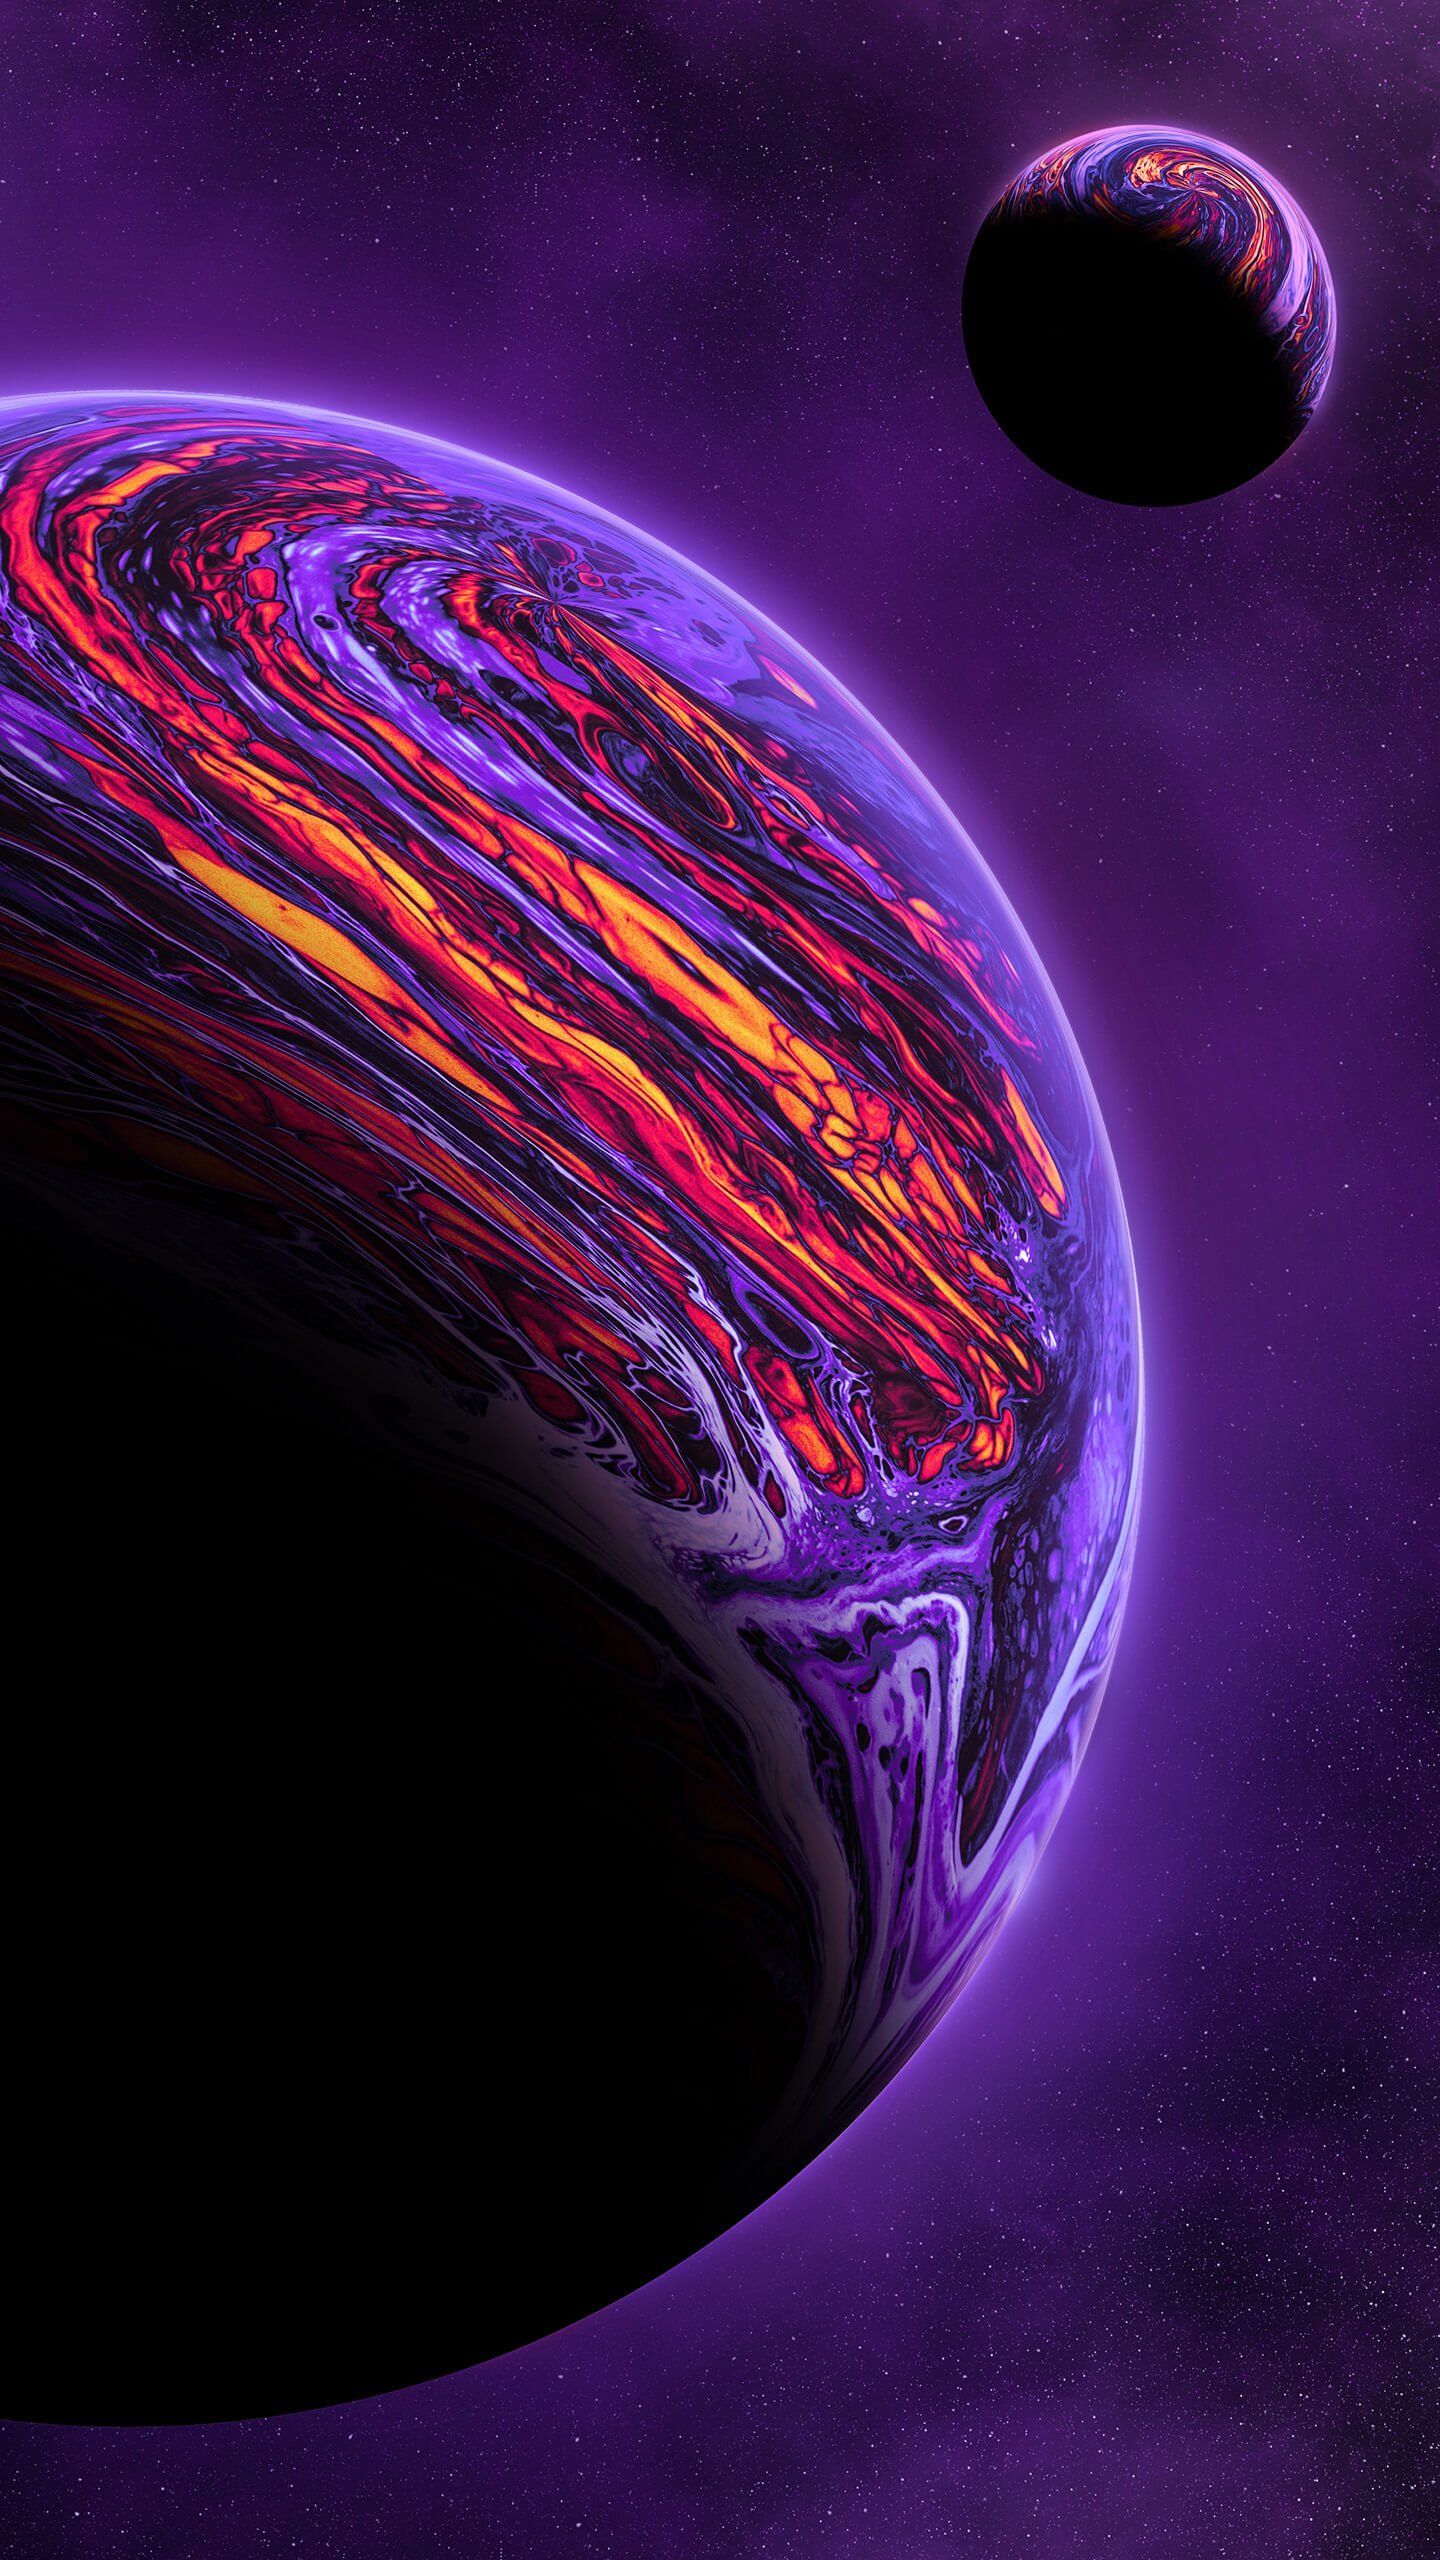 Credits to Geoglyser. Space iphone wallpaper, iPhone wallpaper, iPhone wallpaper sky